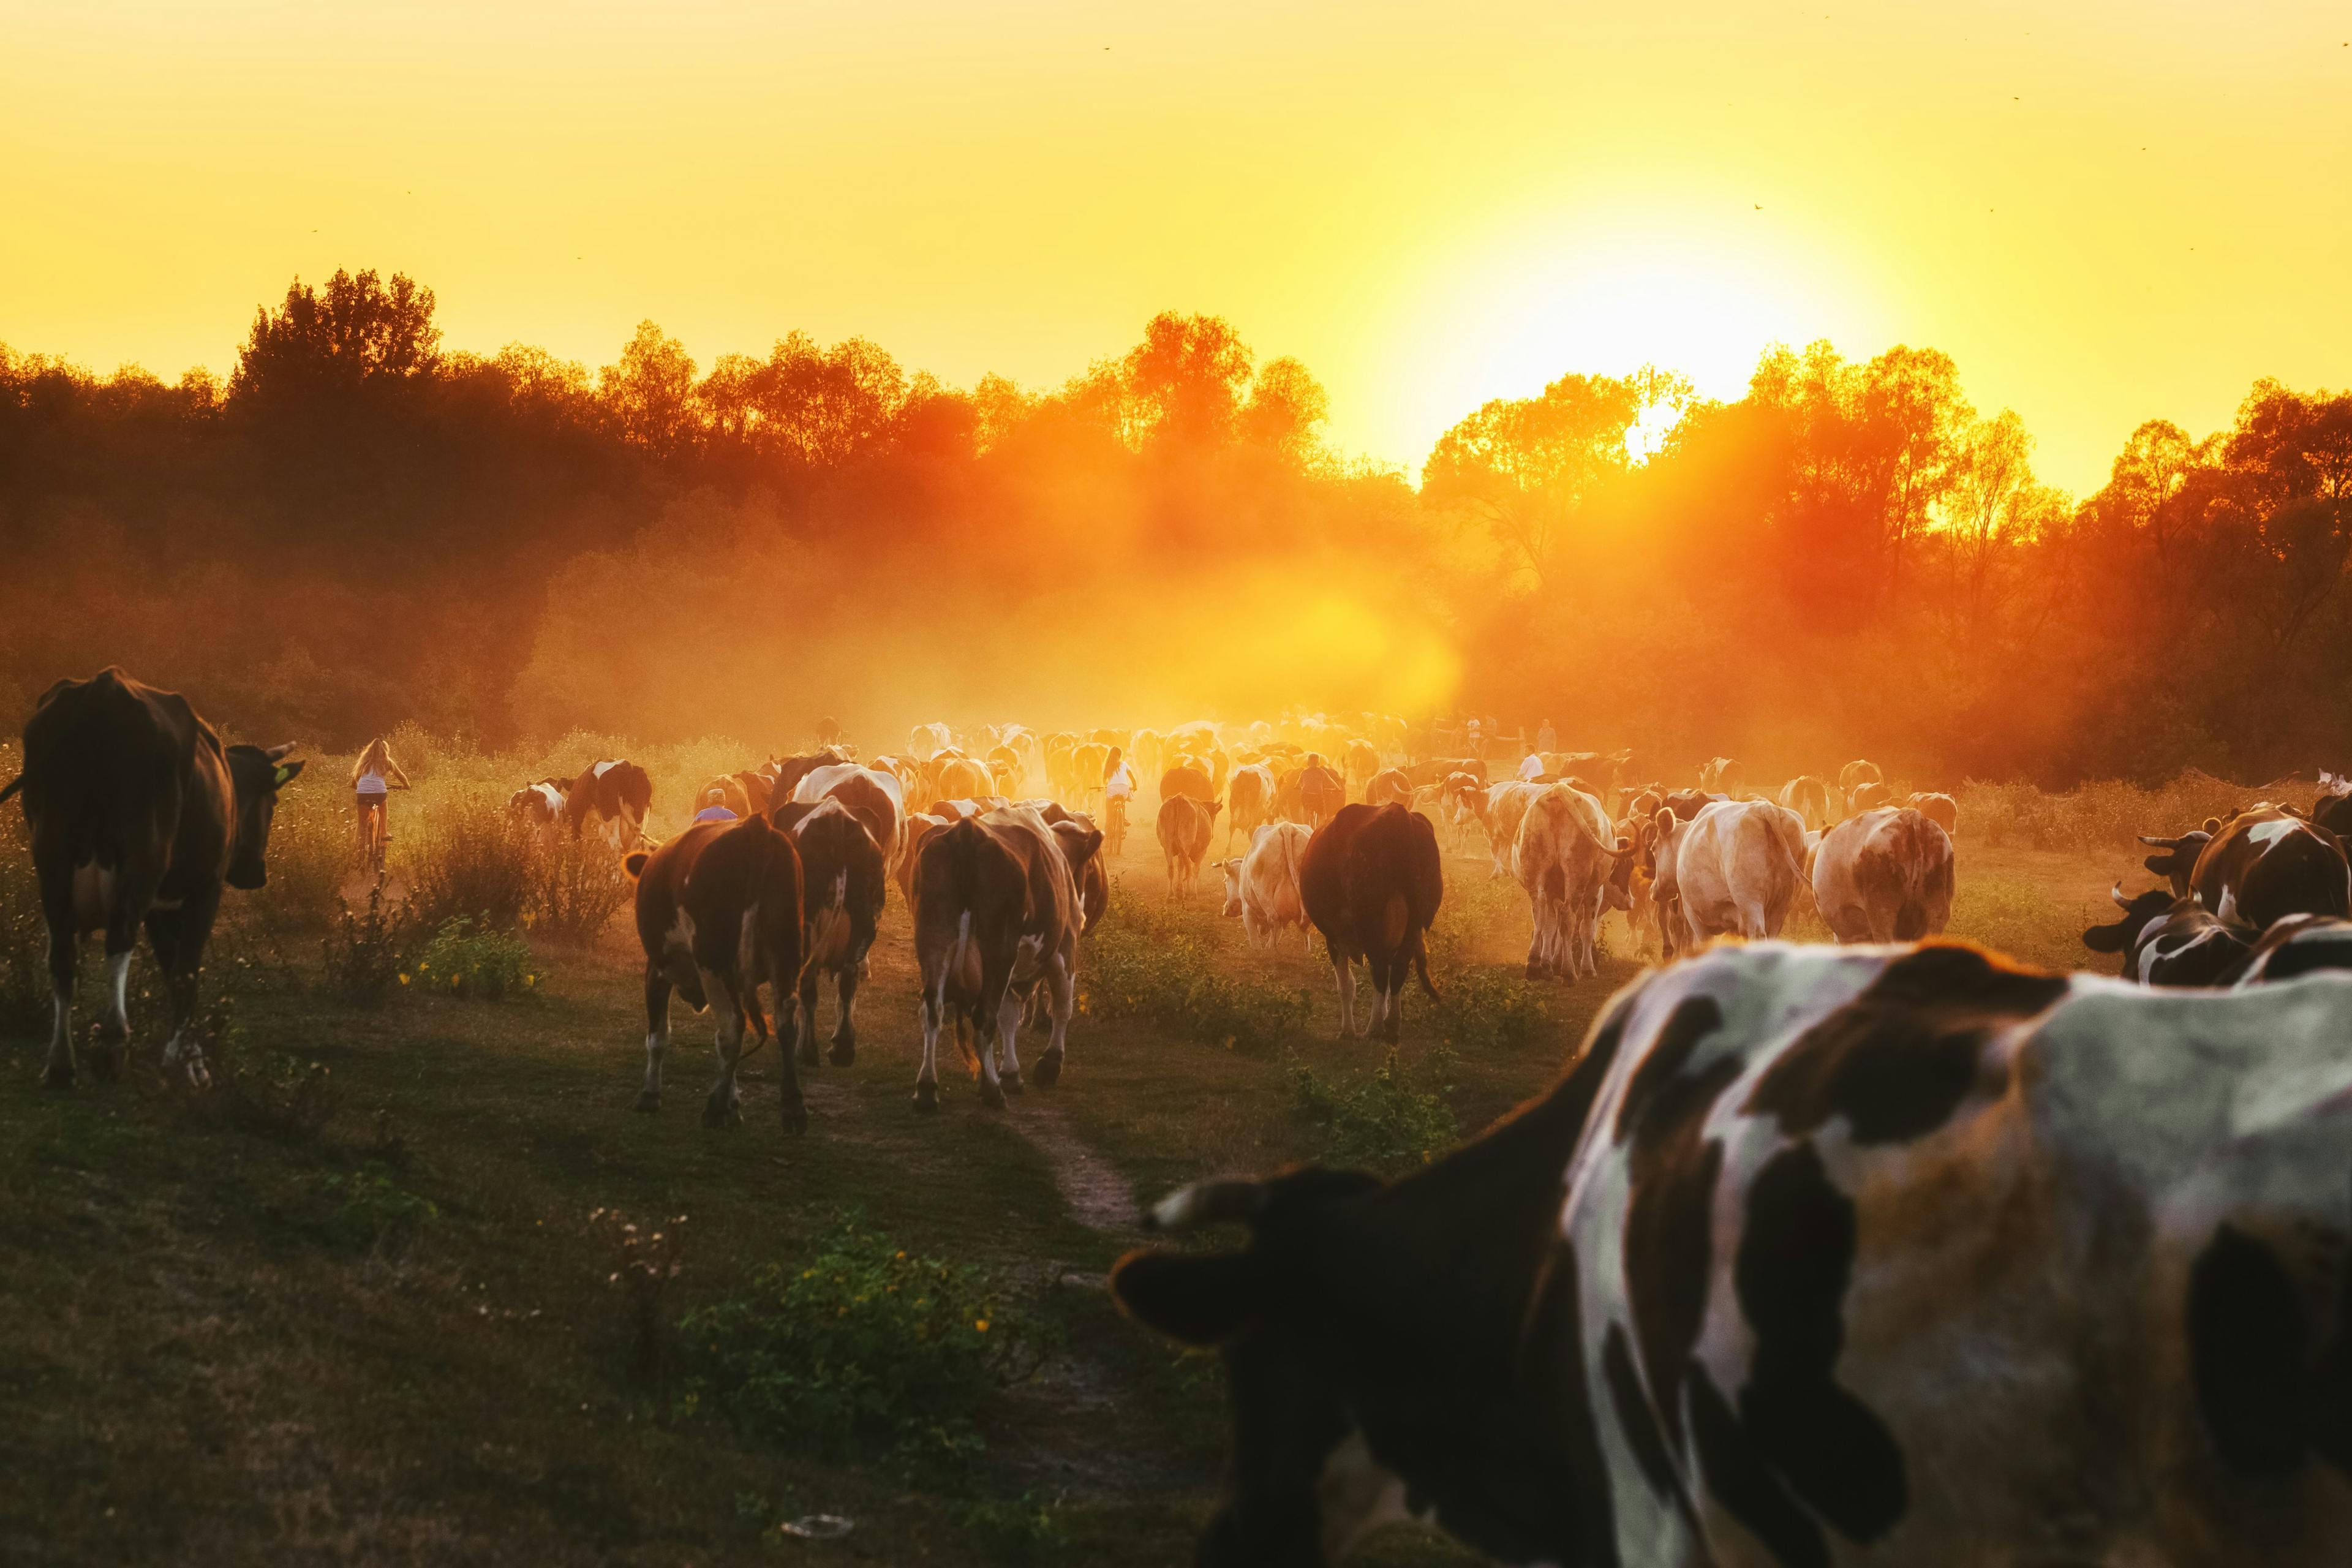 Epic scene of cattle farm - livestock of cows going home from meadows pasture in evening. Amazing sunset scenery. Countryside background. Dairy natural bio production. | Image Credit: © Feel good studio - stock.adobe.com.